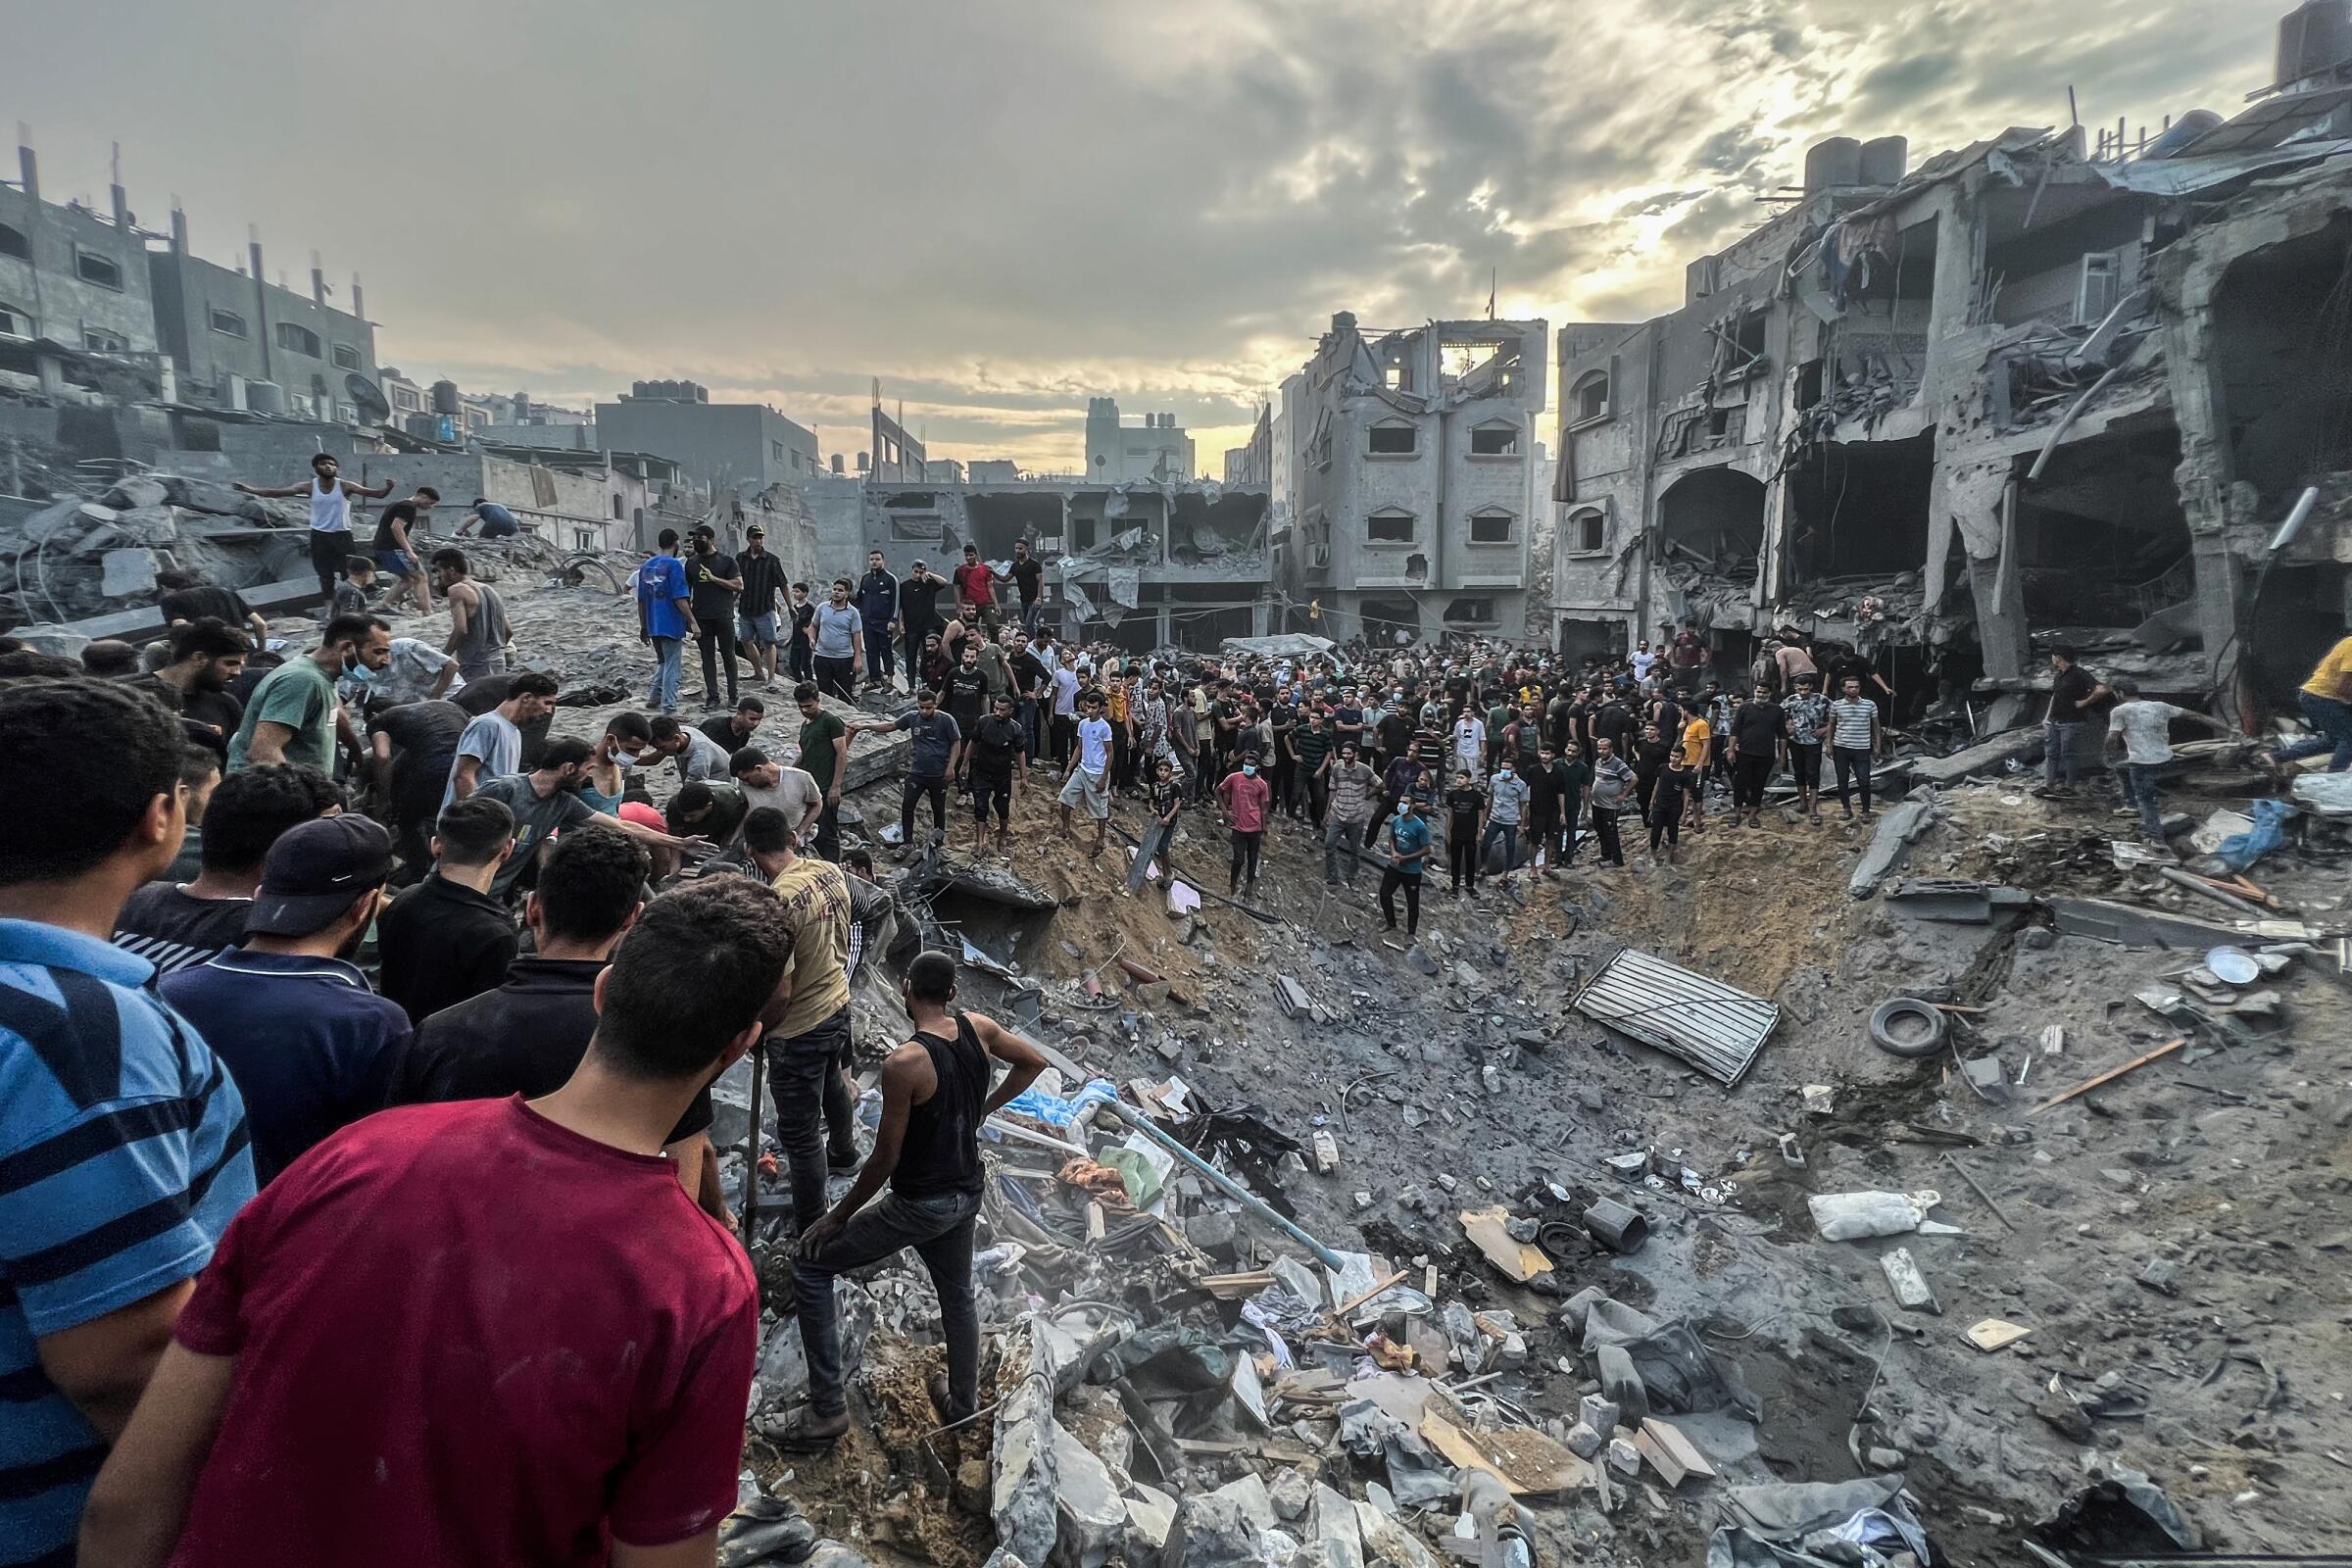 Palestinians search for survivors following an Israeli airstrike in the Jabalia refugee camp north of Gaza City.